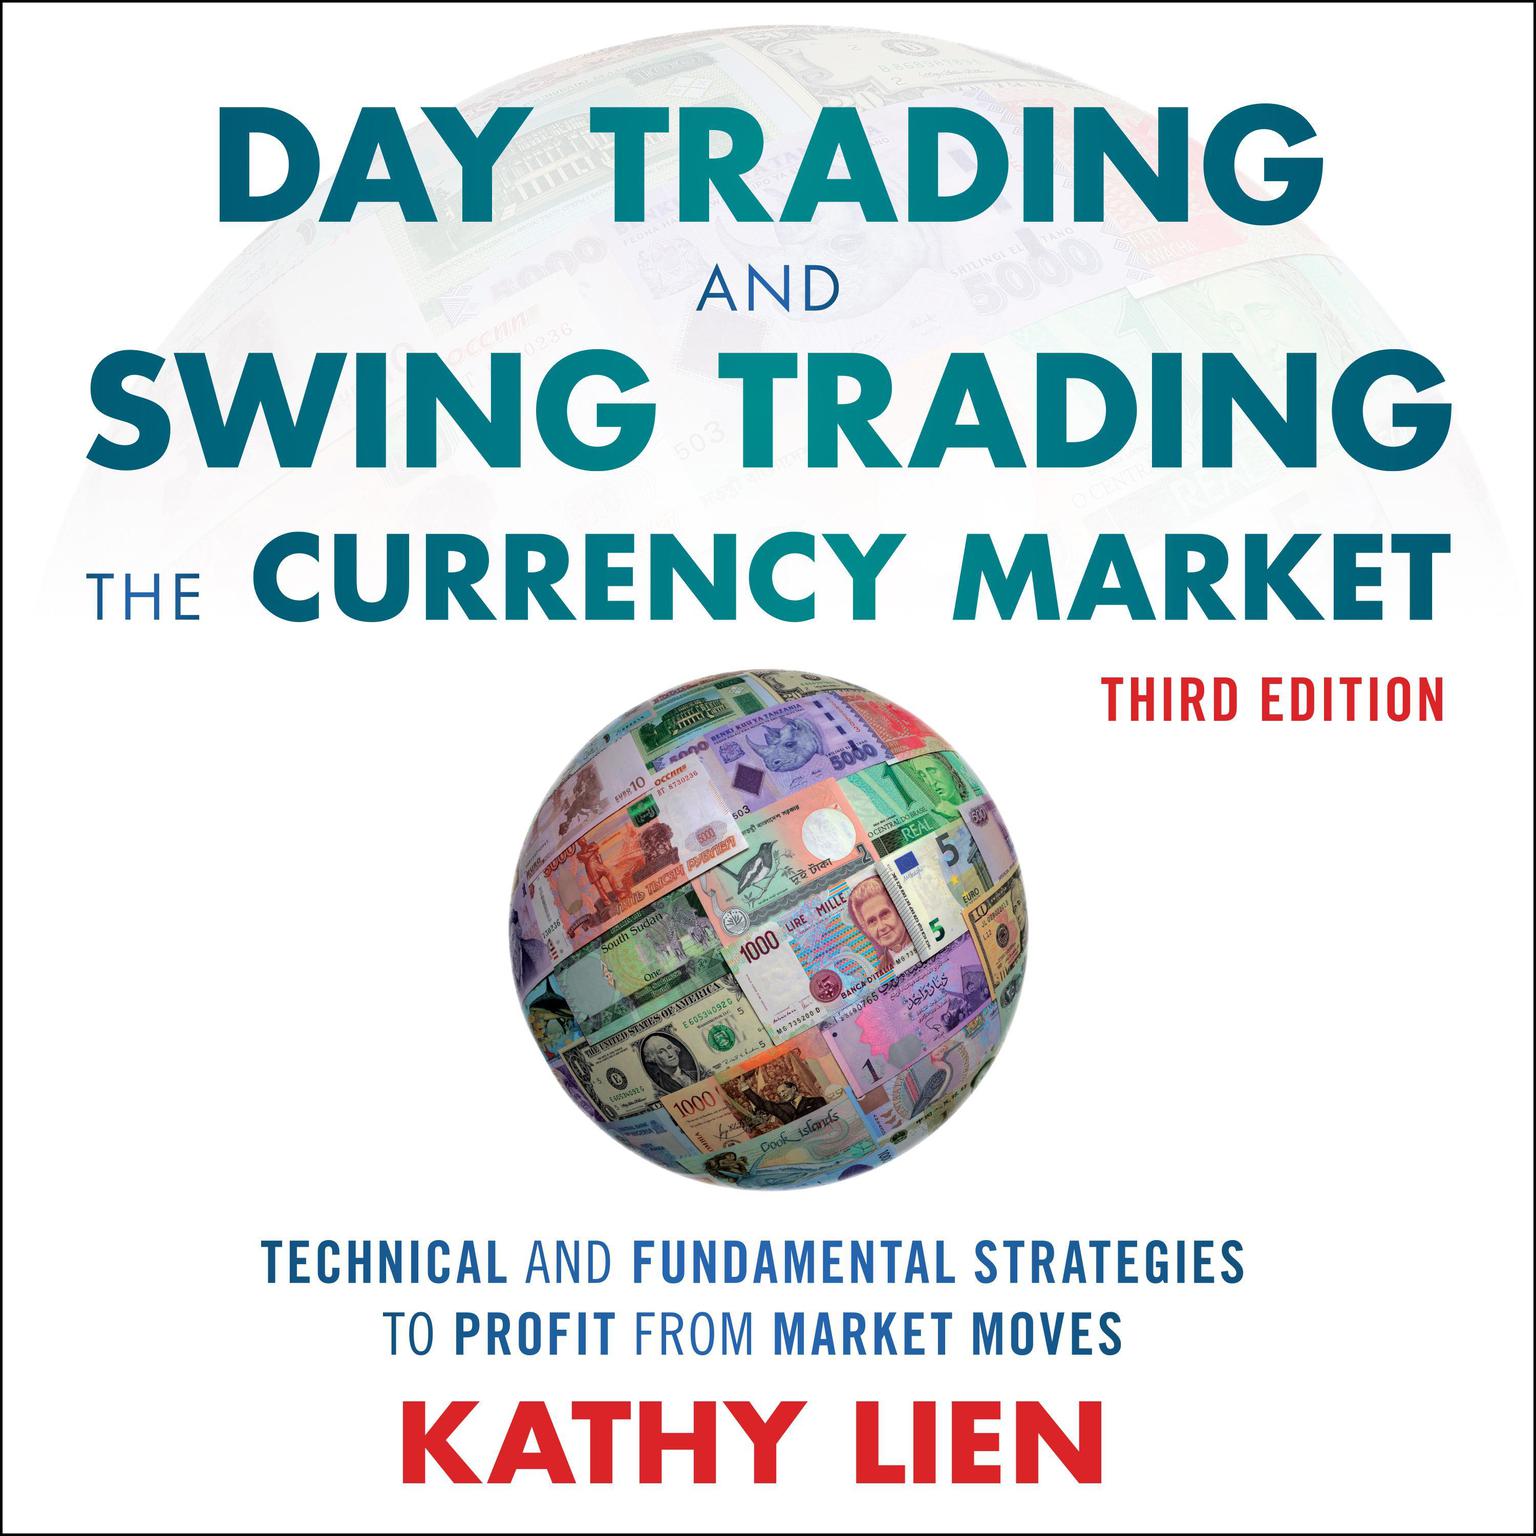 Day Trading and Swing Trading the Currency Market: Technical and Fundamental Strategies to Profit from Market Moves, 3rd Edition Audiobook, by Kathy Lien